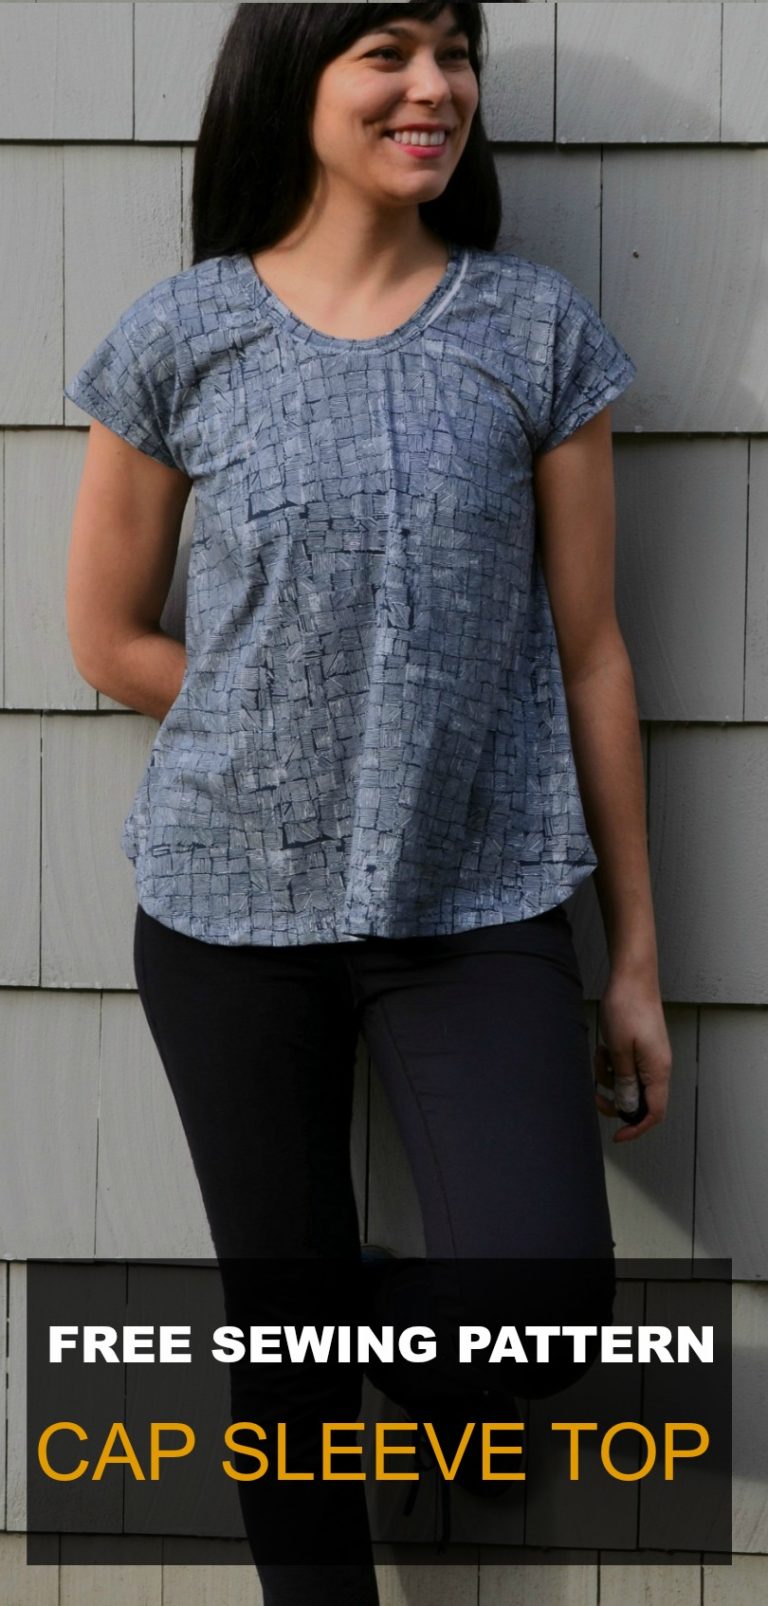 free-sewing-pattern-cap-sleeve-top-on-the-cutting-floor-printable